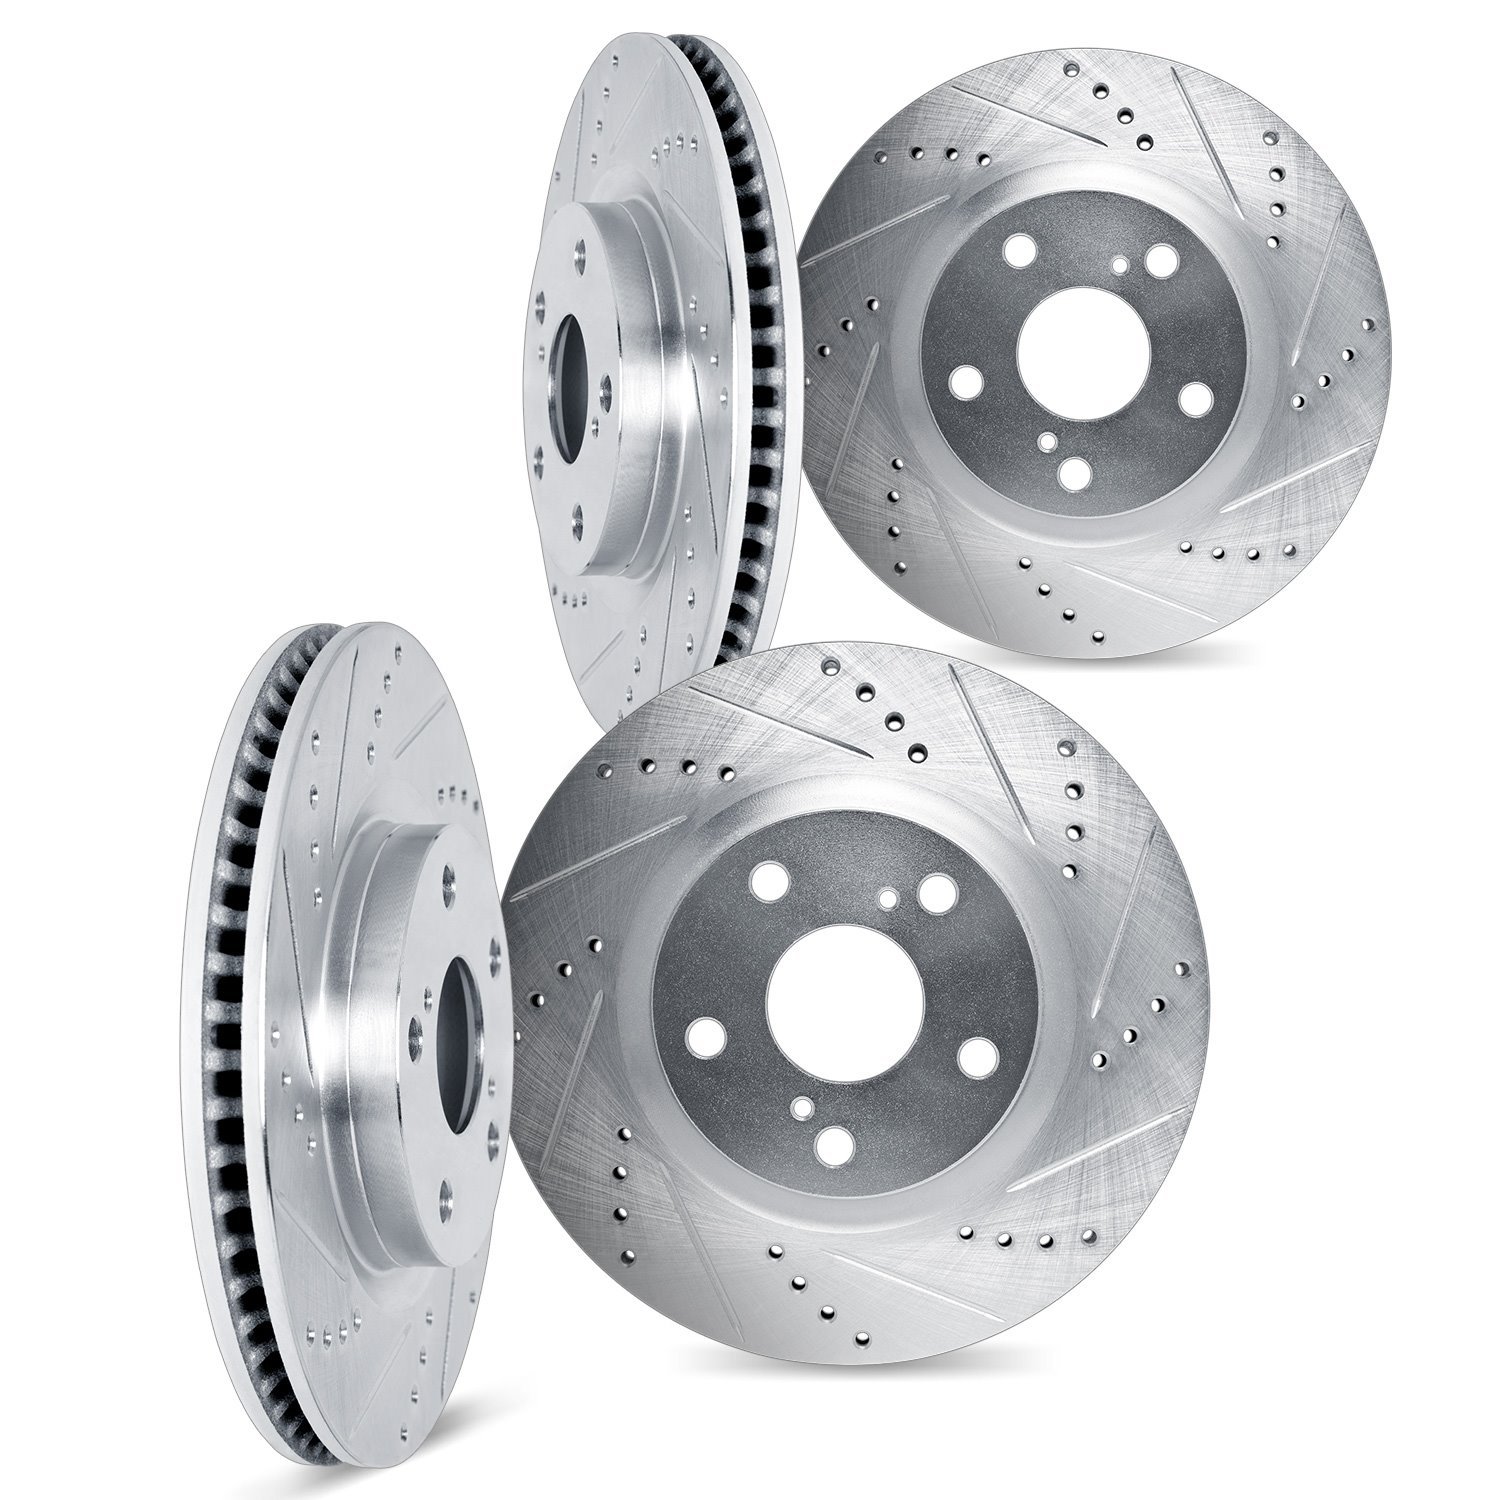 7004-46011 Drilled/Slotted Brake Rotors [Silver], Fits Select GM, Position: Front and Rear